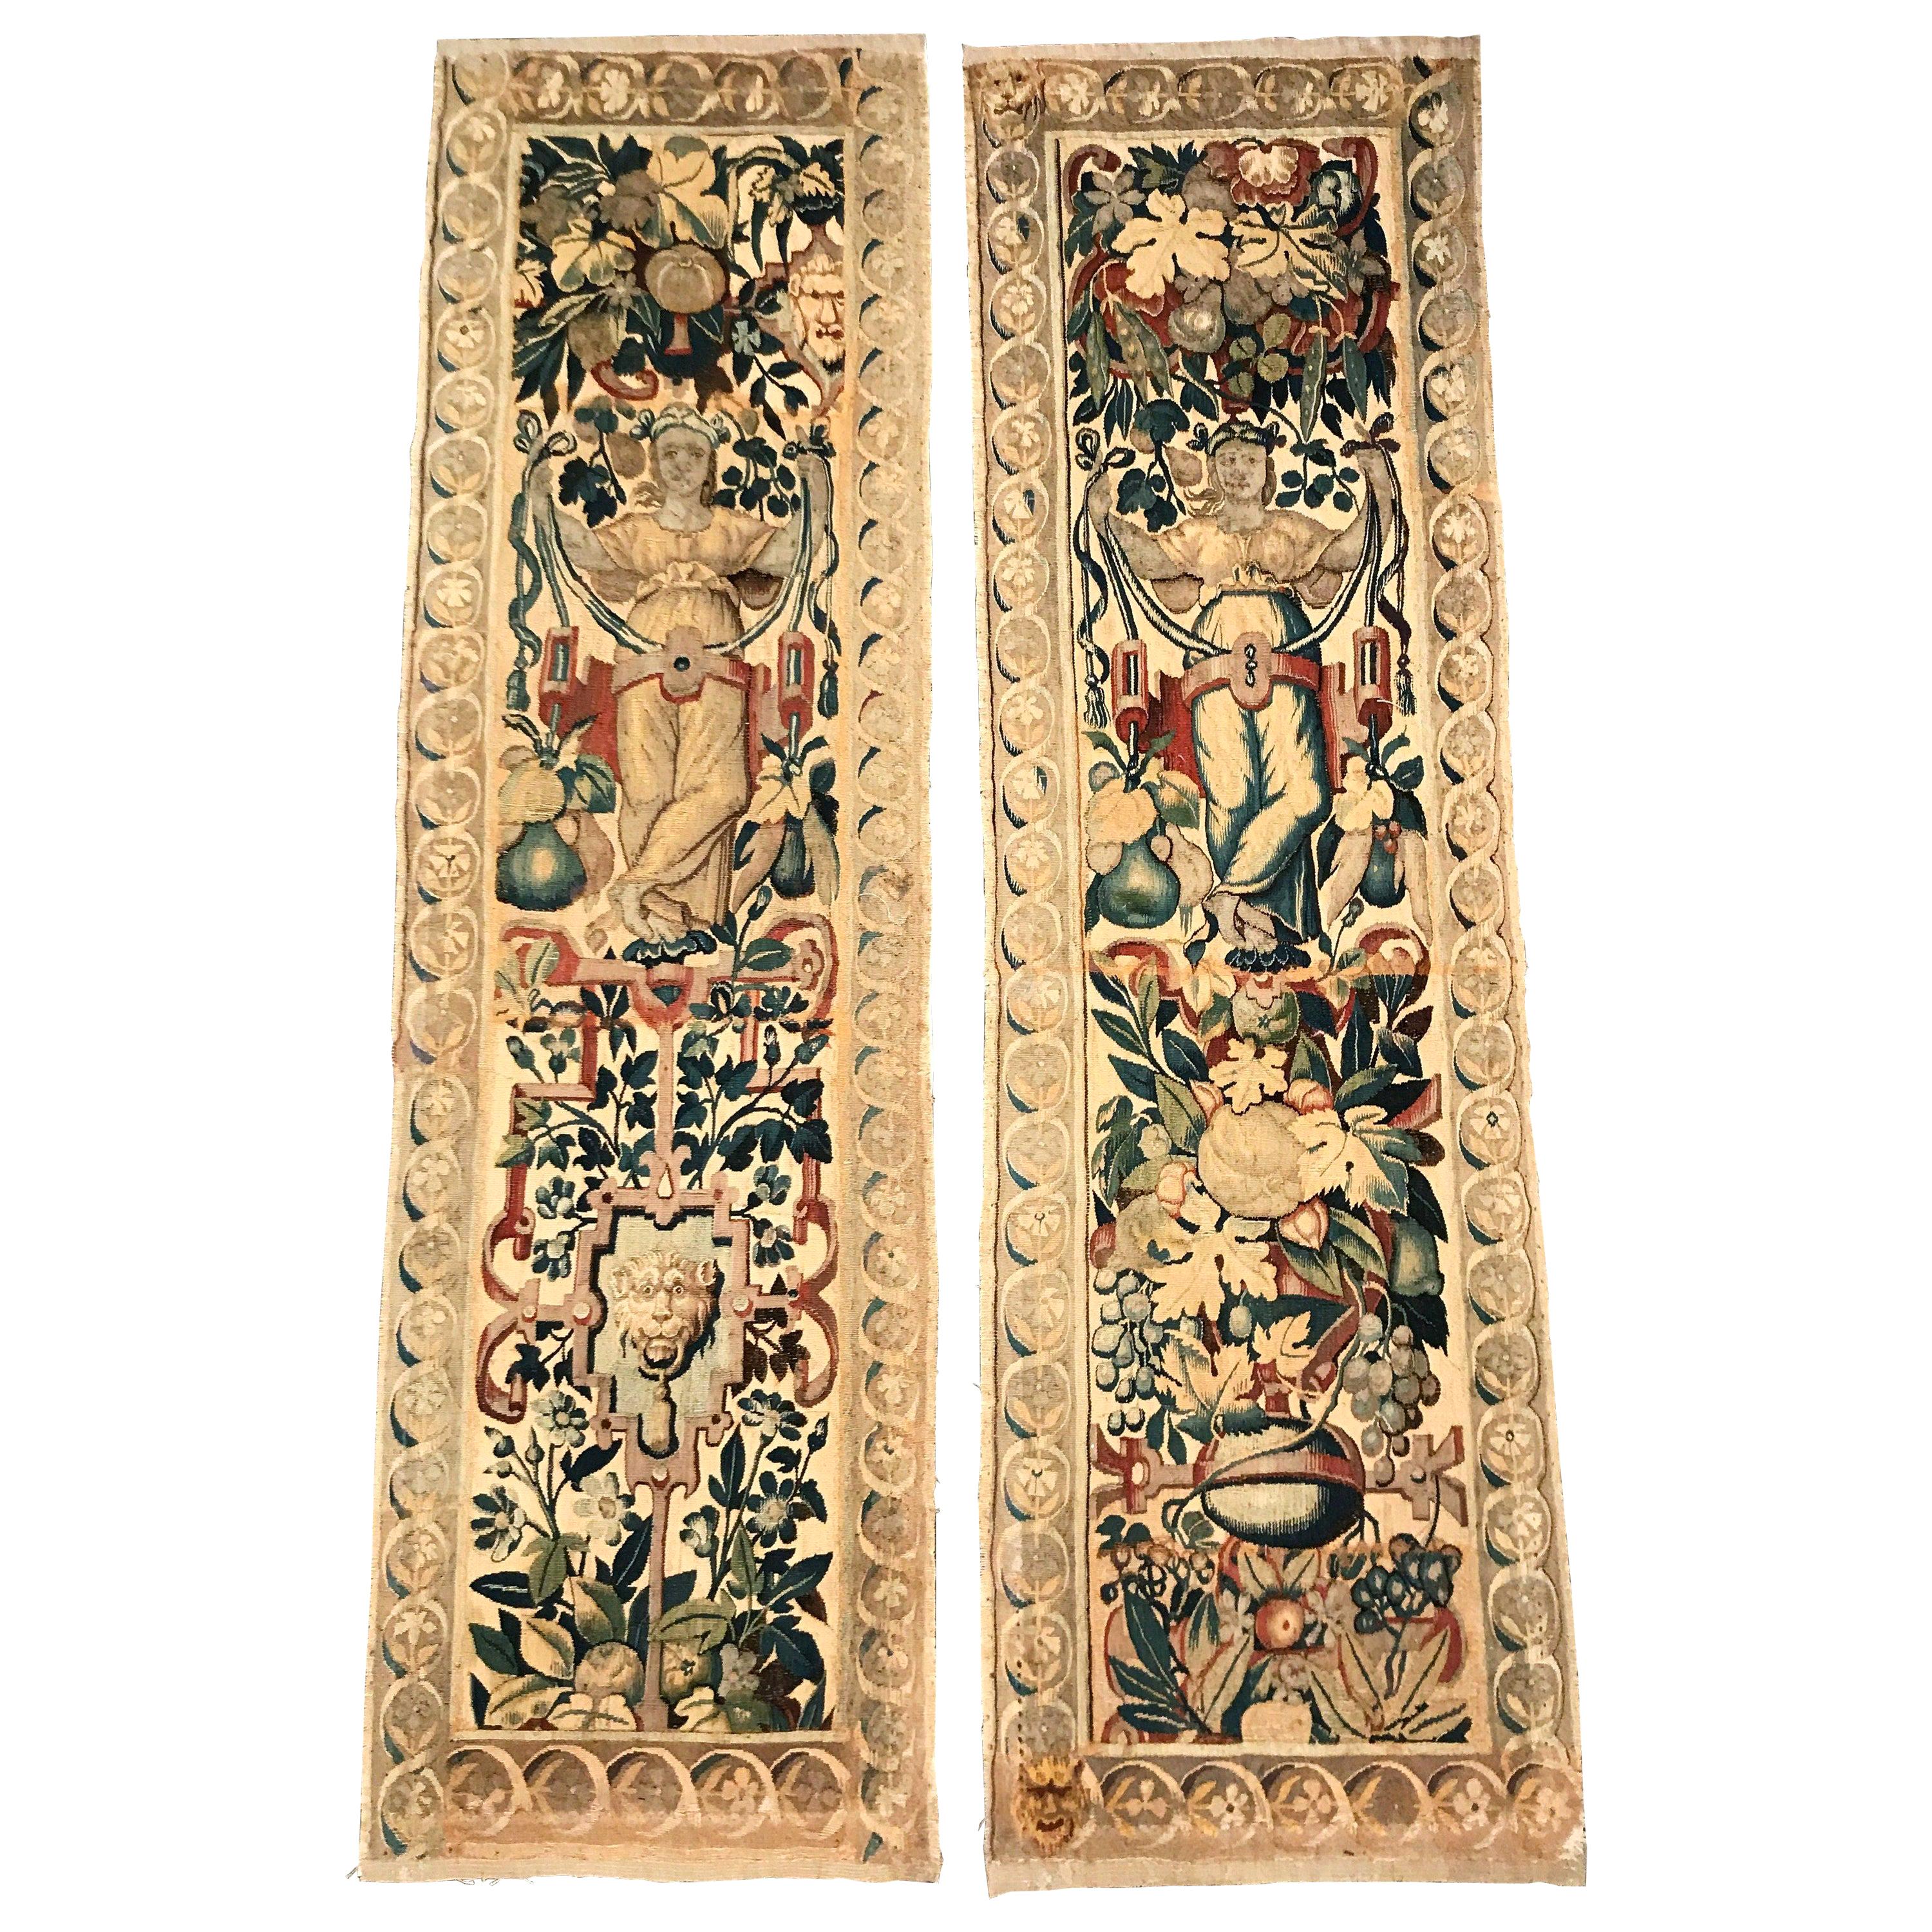 Pair of 18th Century Flemish Handwoven Portiere Wall Hanging Tapestries